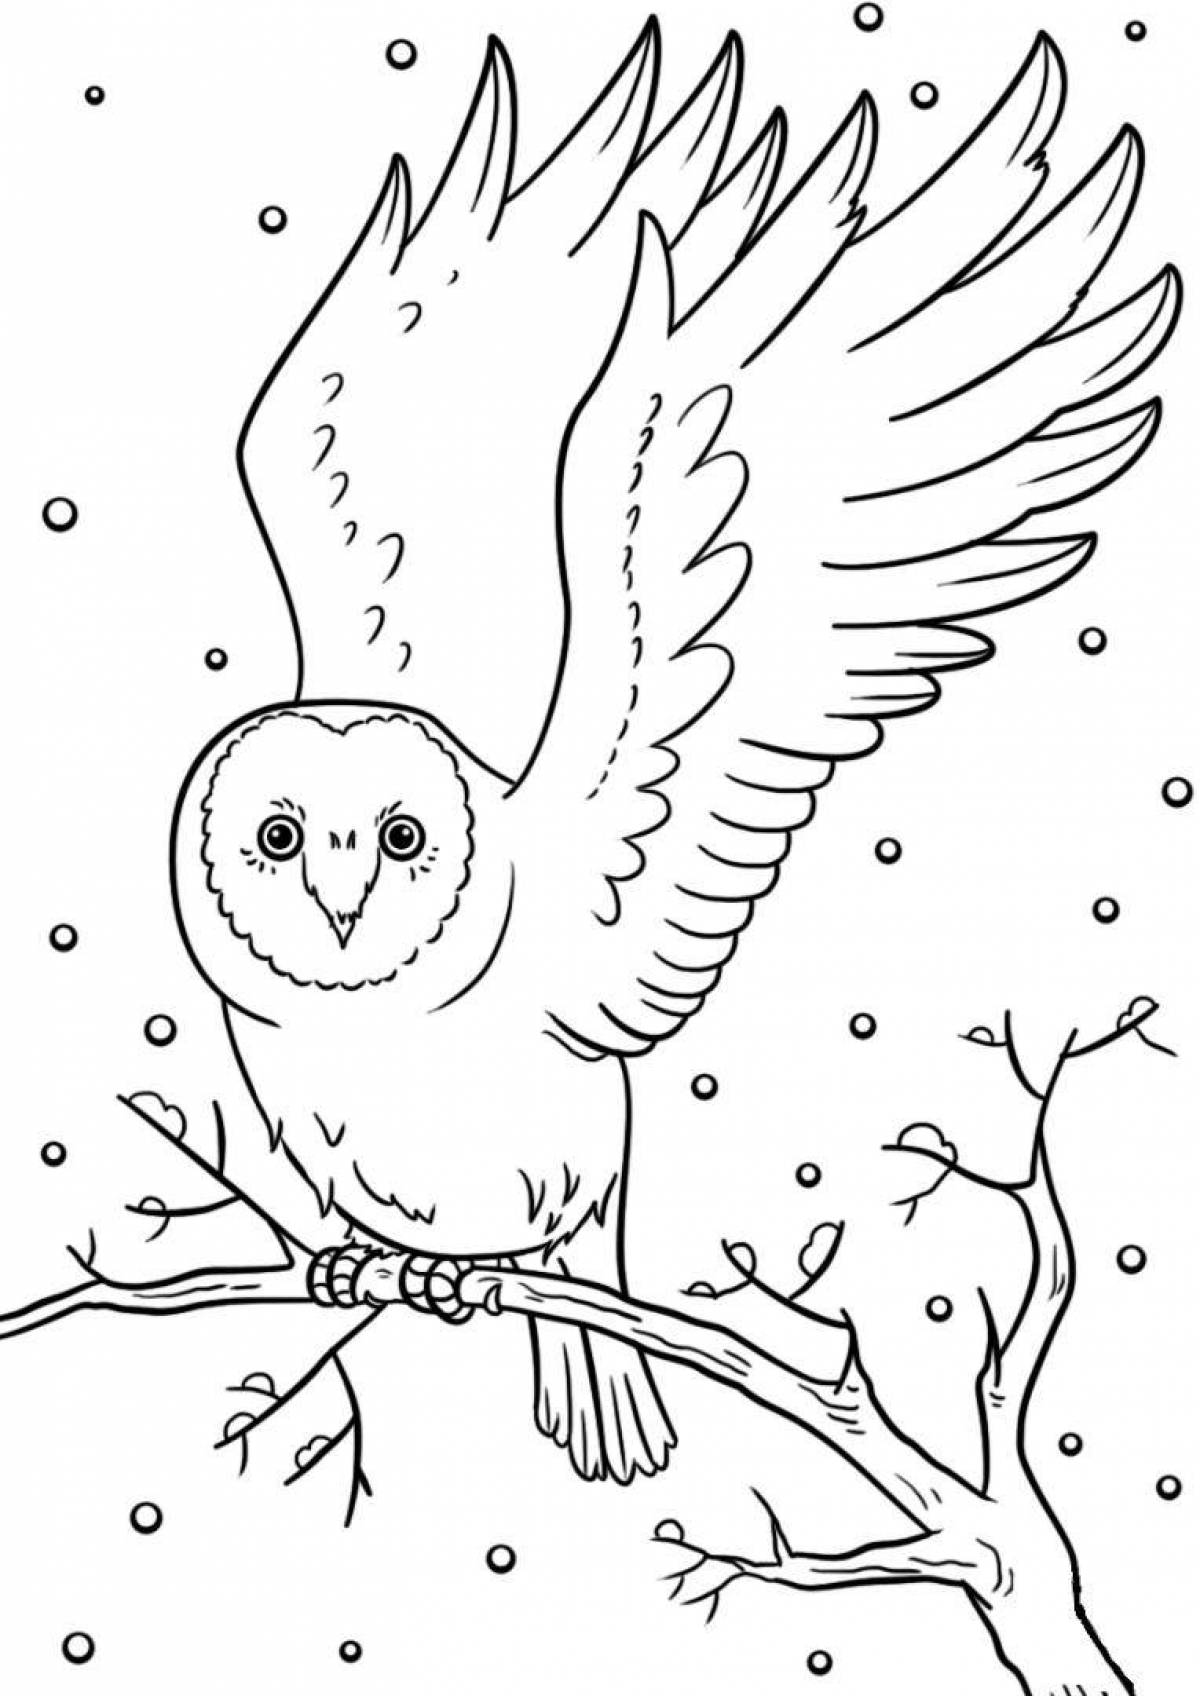 Outstanding winter birds coloring book for 3-4 year olds